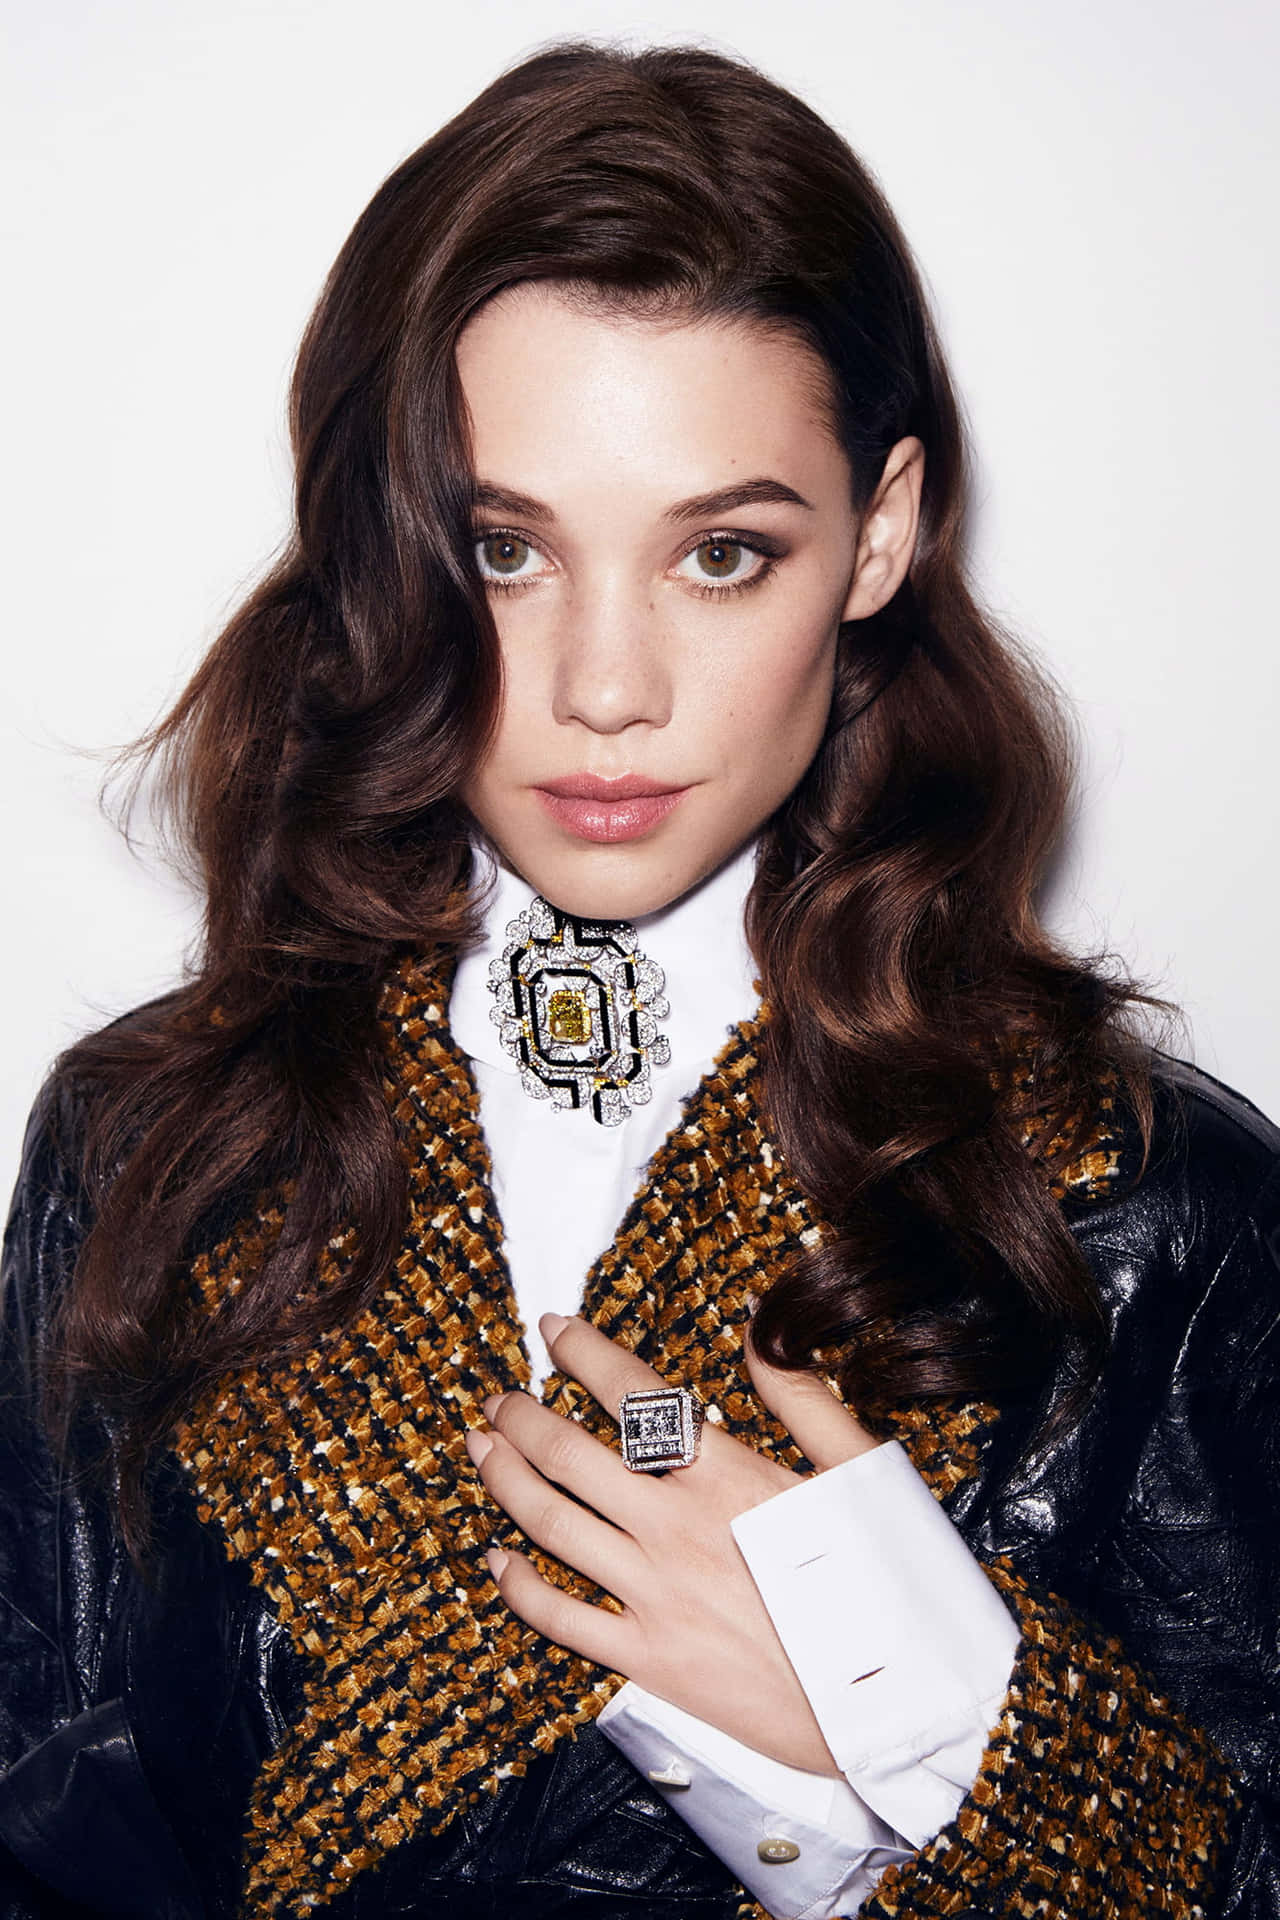 Astrid Bergès-Frisbey posing for a photoshoot Wallpaper